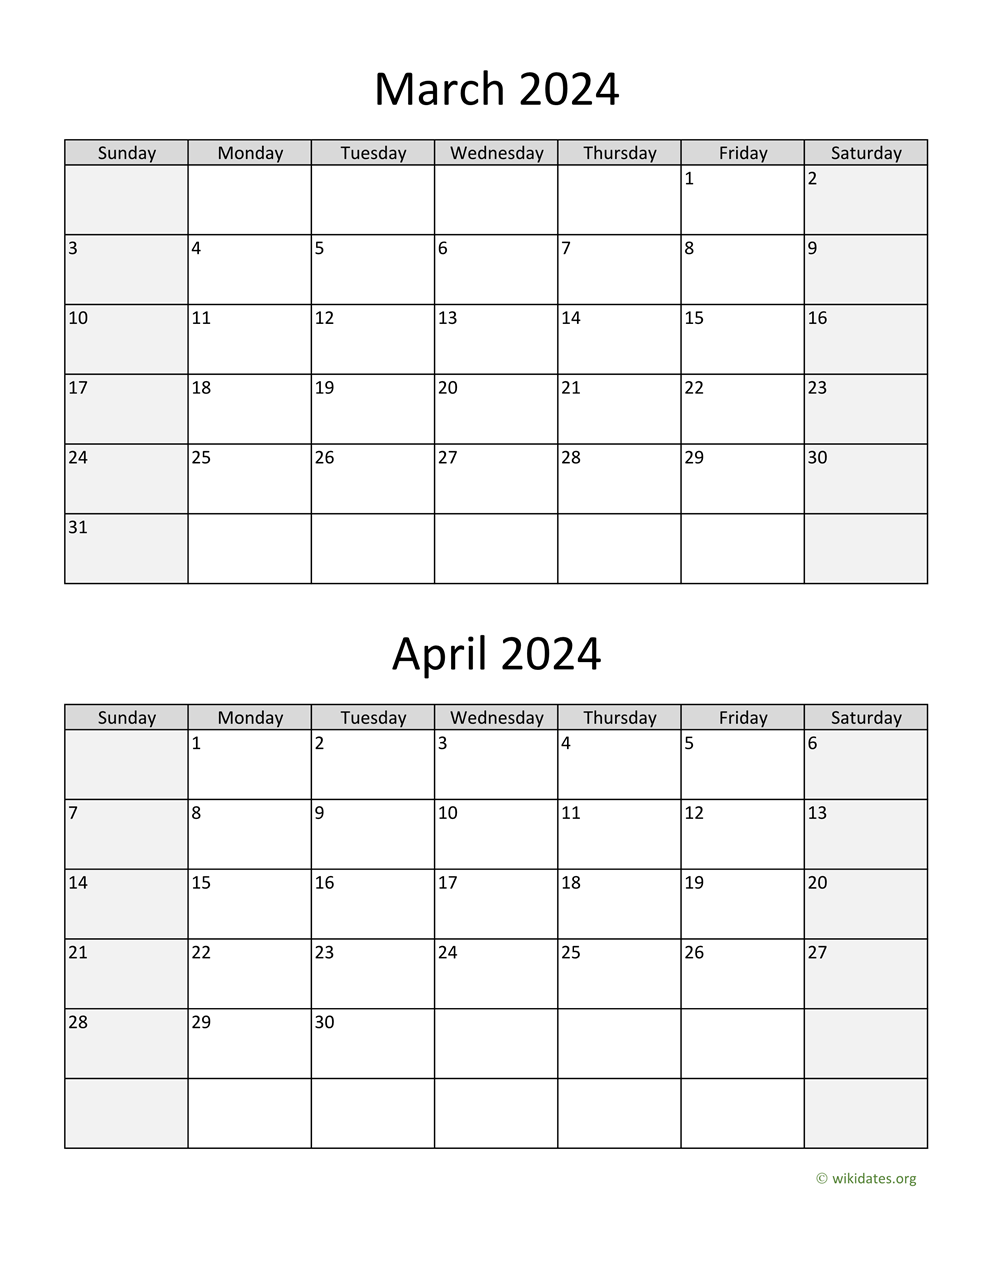 March And April 2024 Calendar | Wikidates for Calendar 2024 March And April Printable